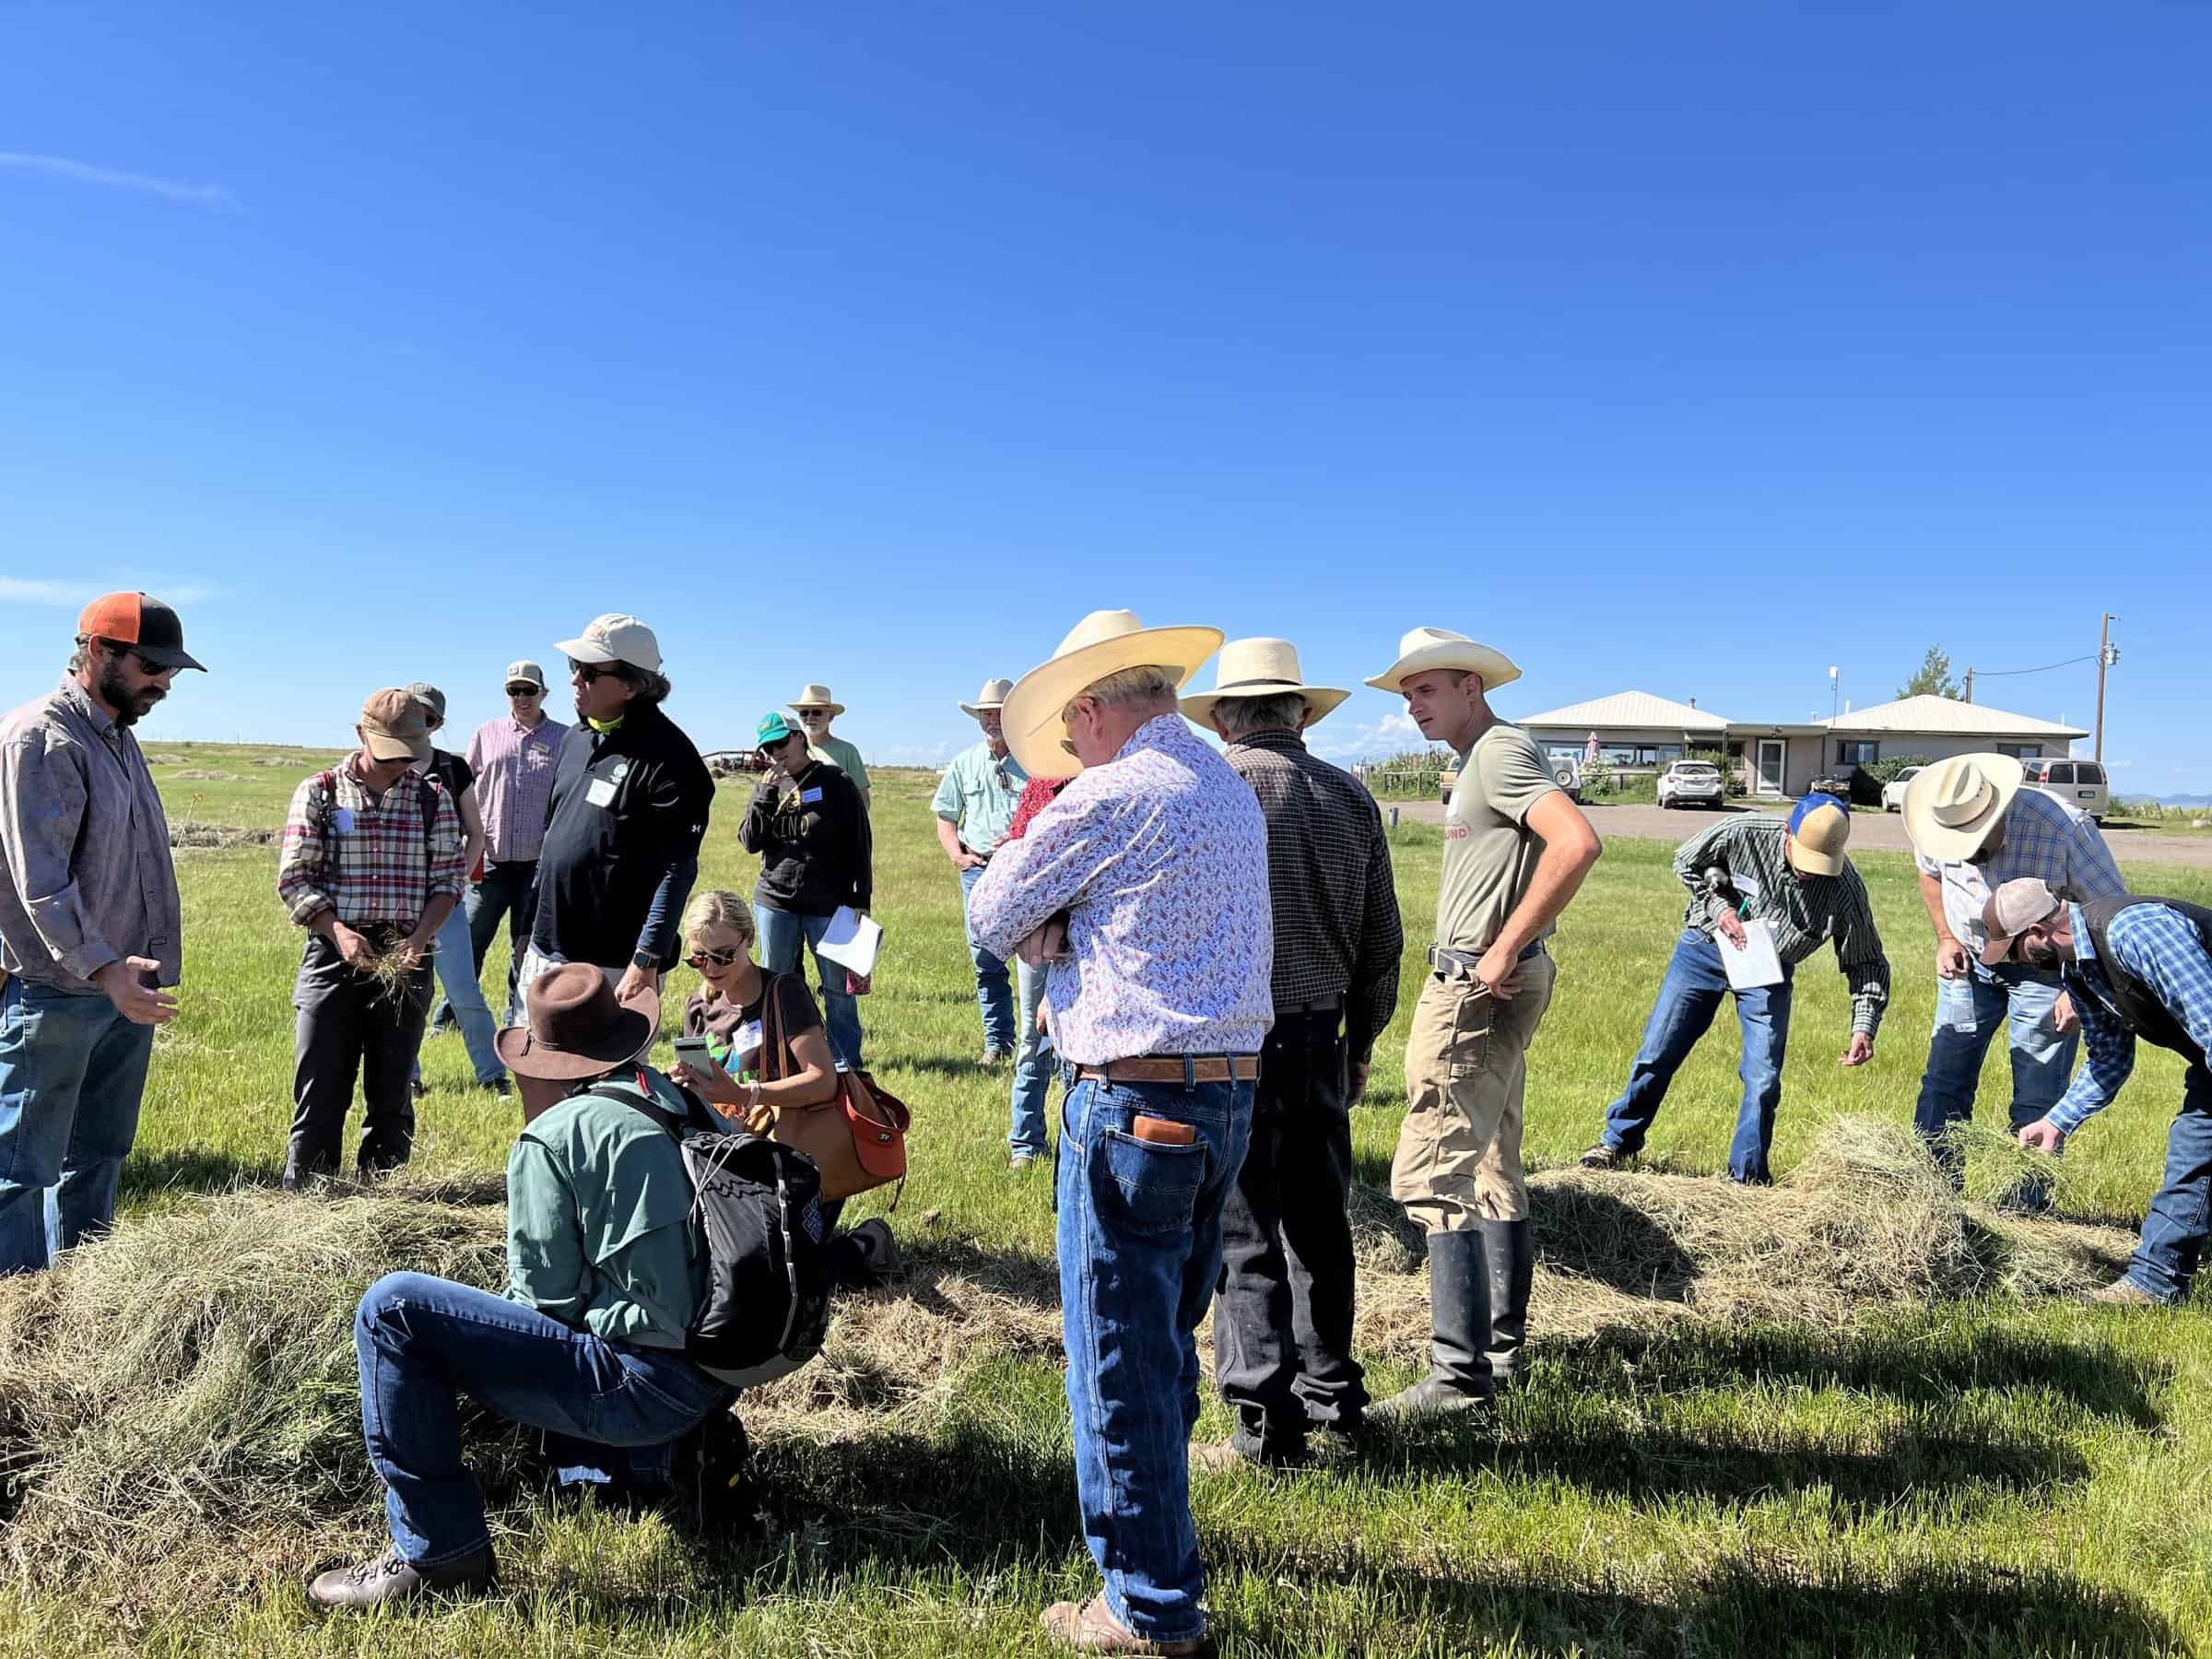 Tour attendees bend down near piles of hay in the fields of San Juan Ranch on a sunny day.